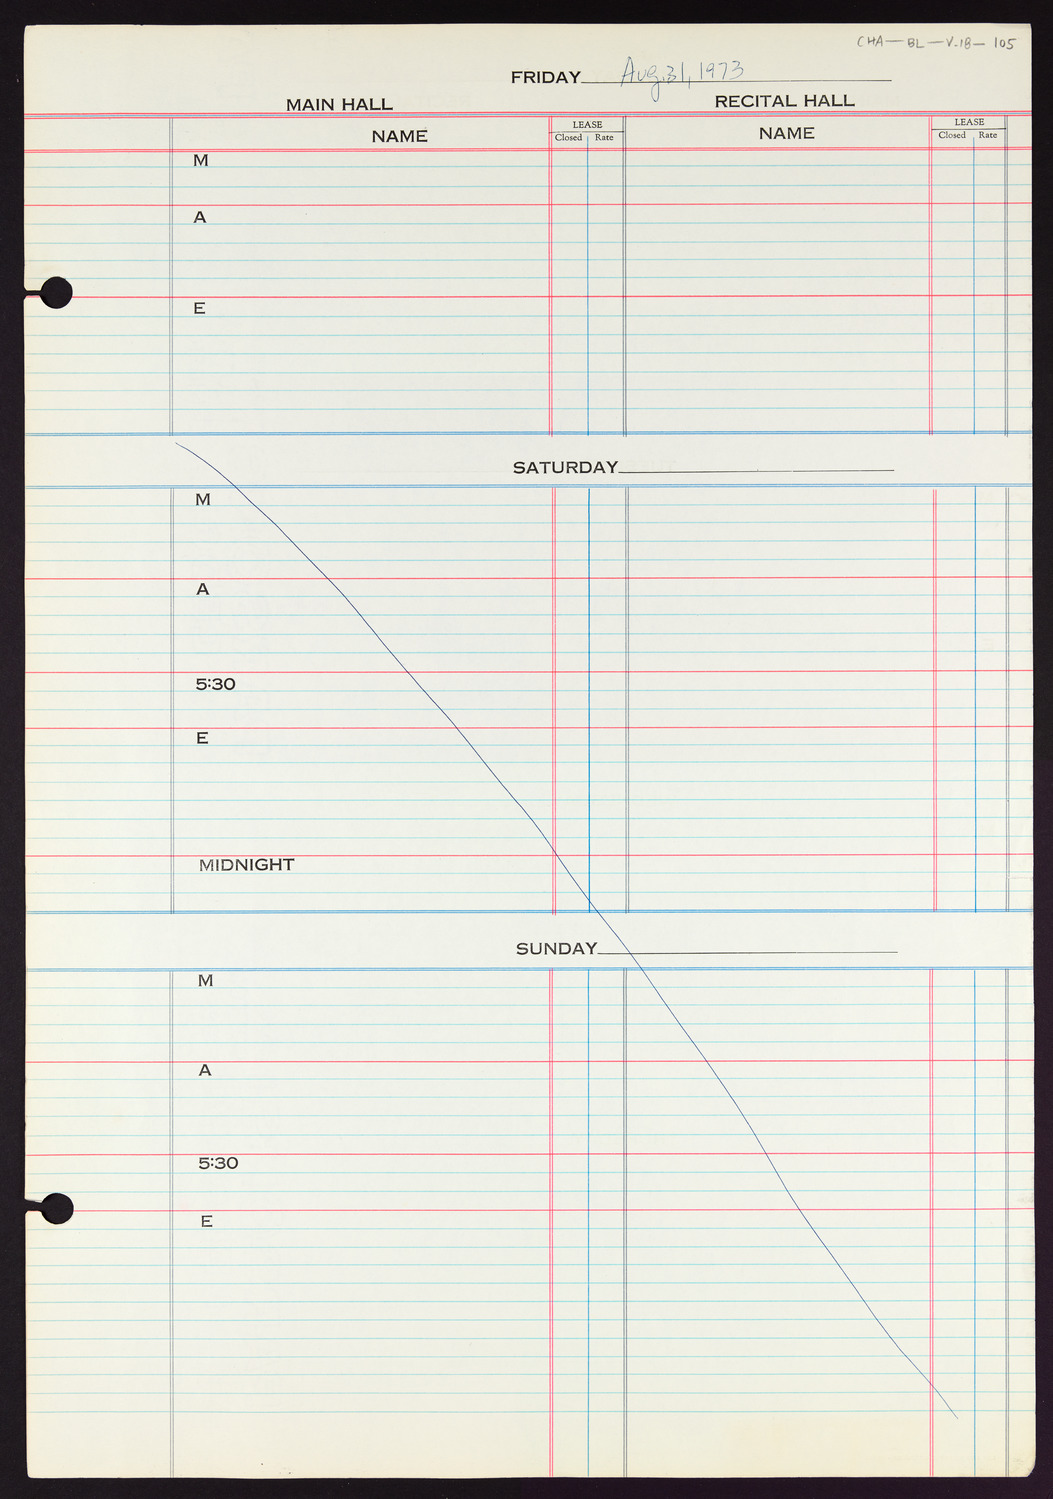 Carnegie Hall Booking Ledger, volume 18, page 105